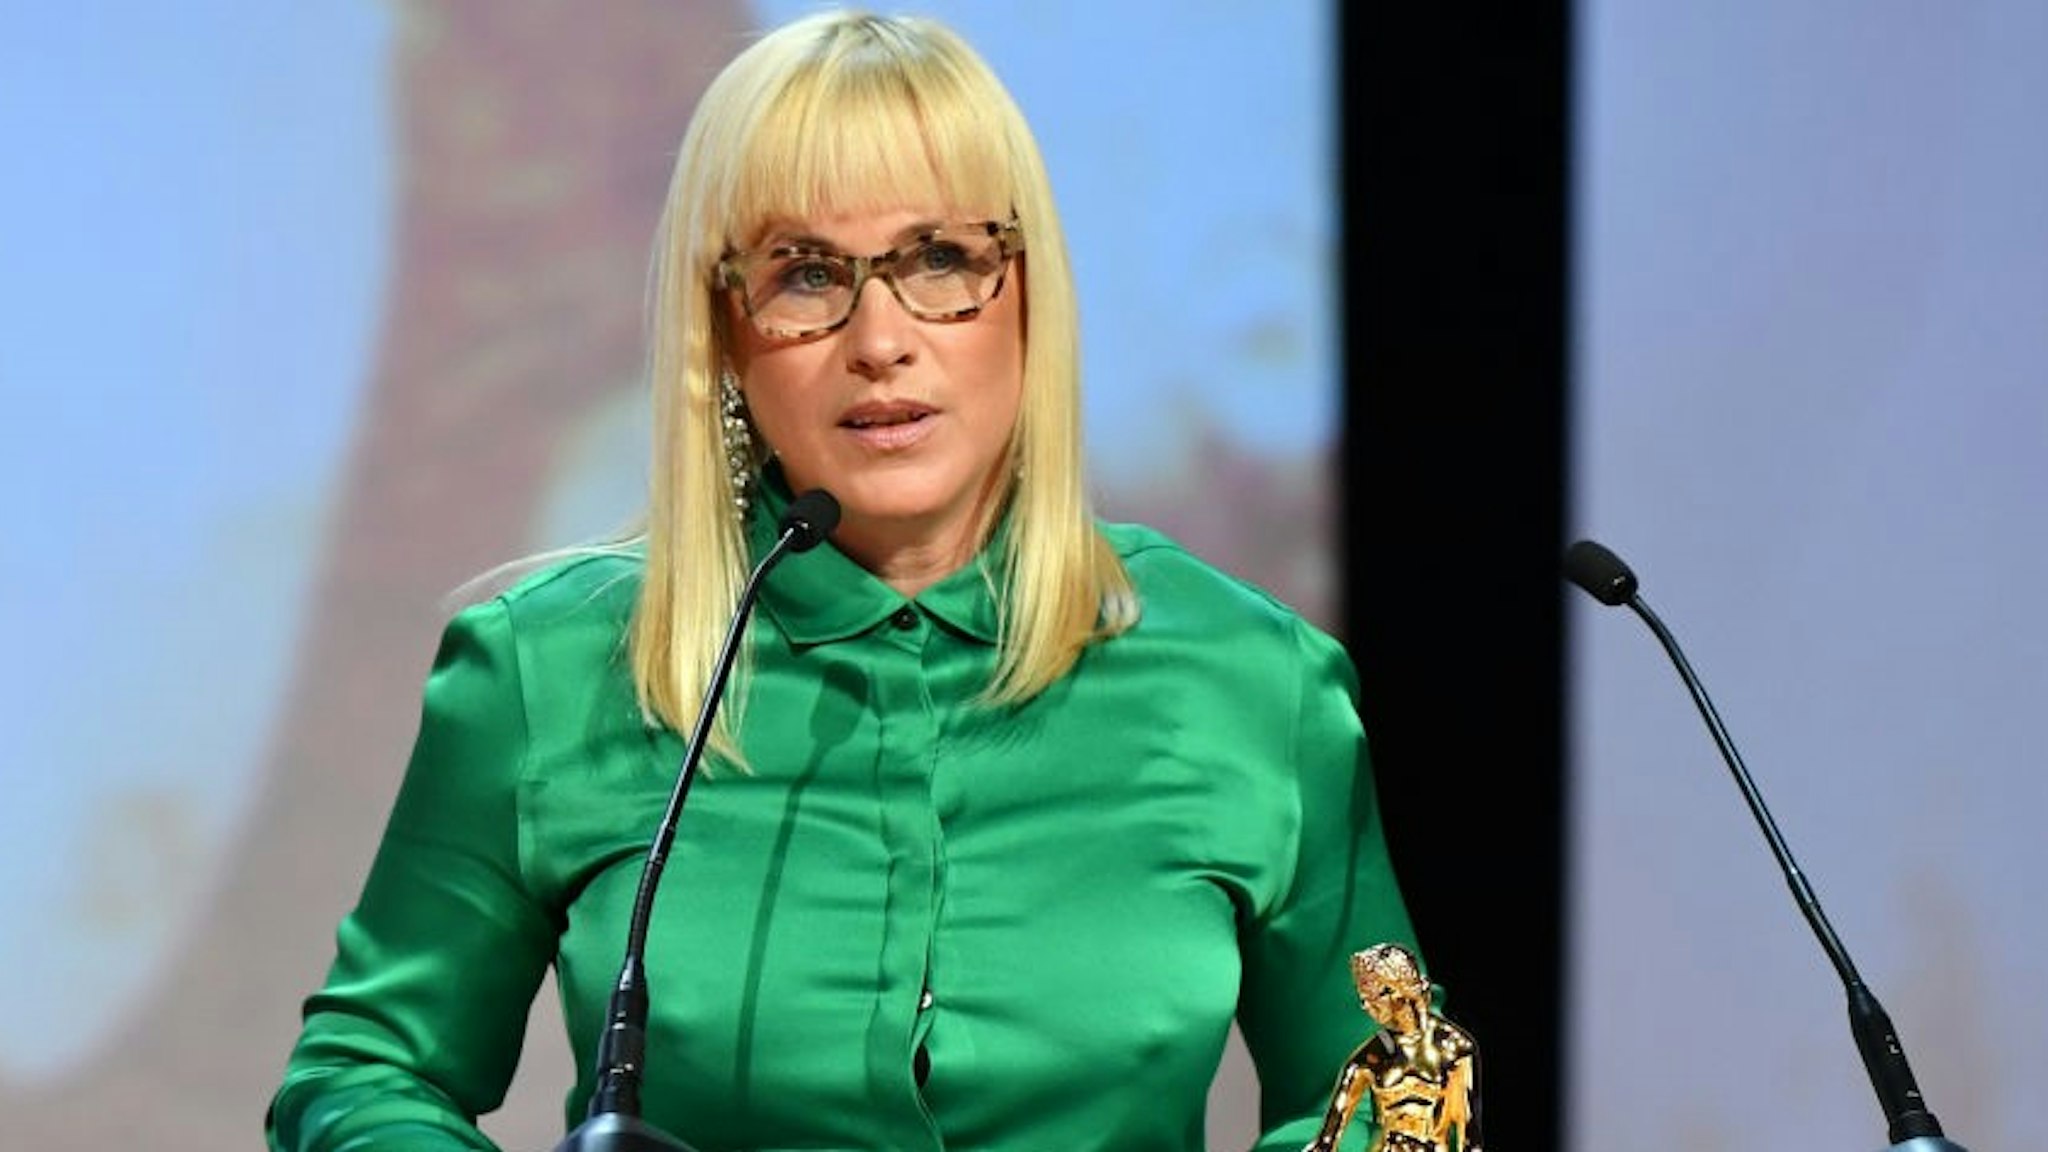 MONTE-CARLO, MONACO - JUNE 18: Patricia Arquette speaks on stage during the closing ceremony of the 59th Monte Carlo TV Festival on June 18, 2019 in Monte-Carlo, Monaco. (Photo by